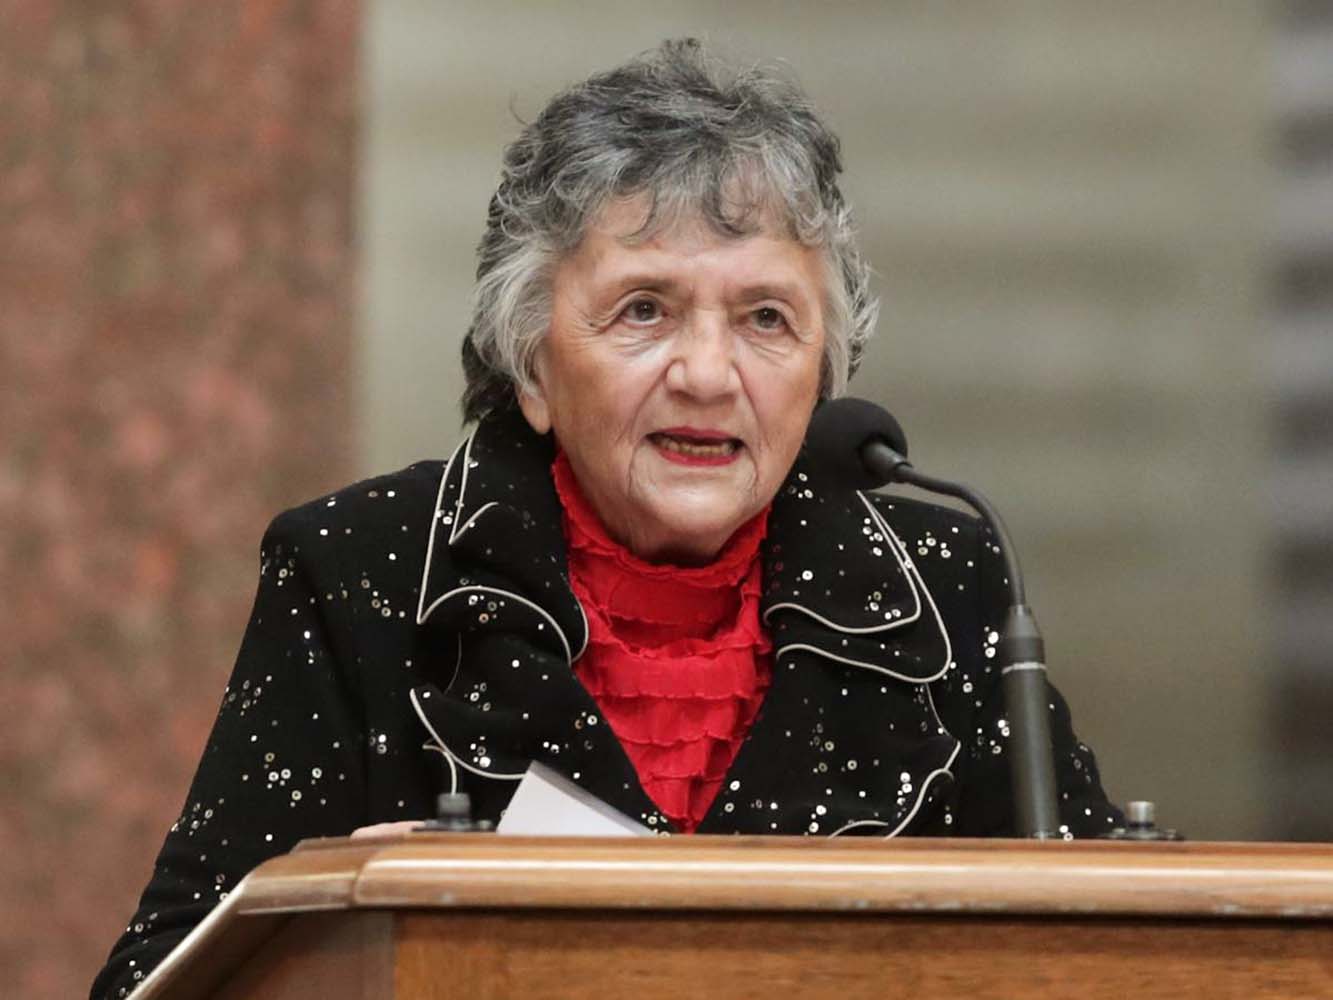 Shirley Abrahamson speaking at her retirement celebration in 2019. Photo: Amber Arnold, Wisconsin State Journal